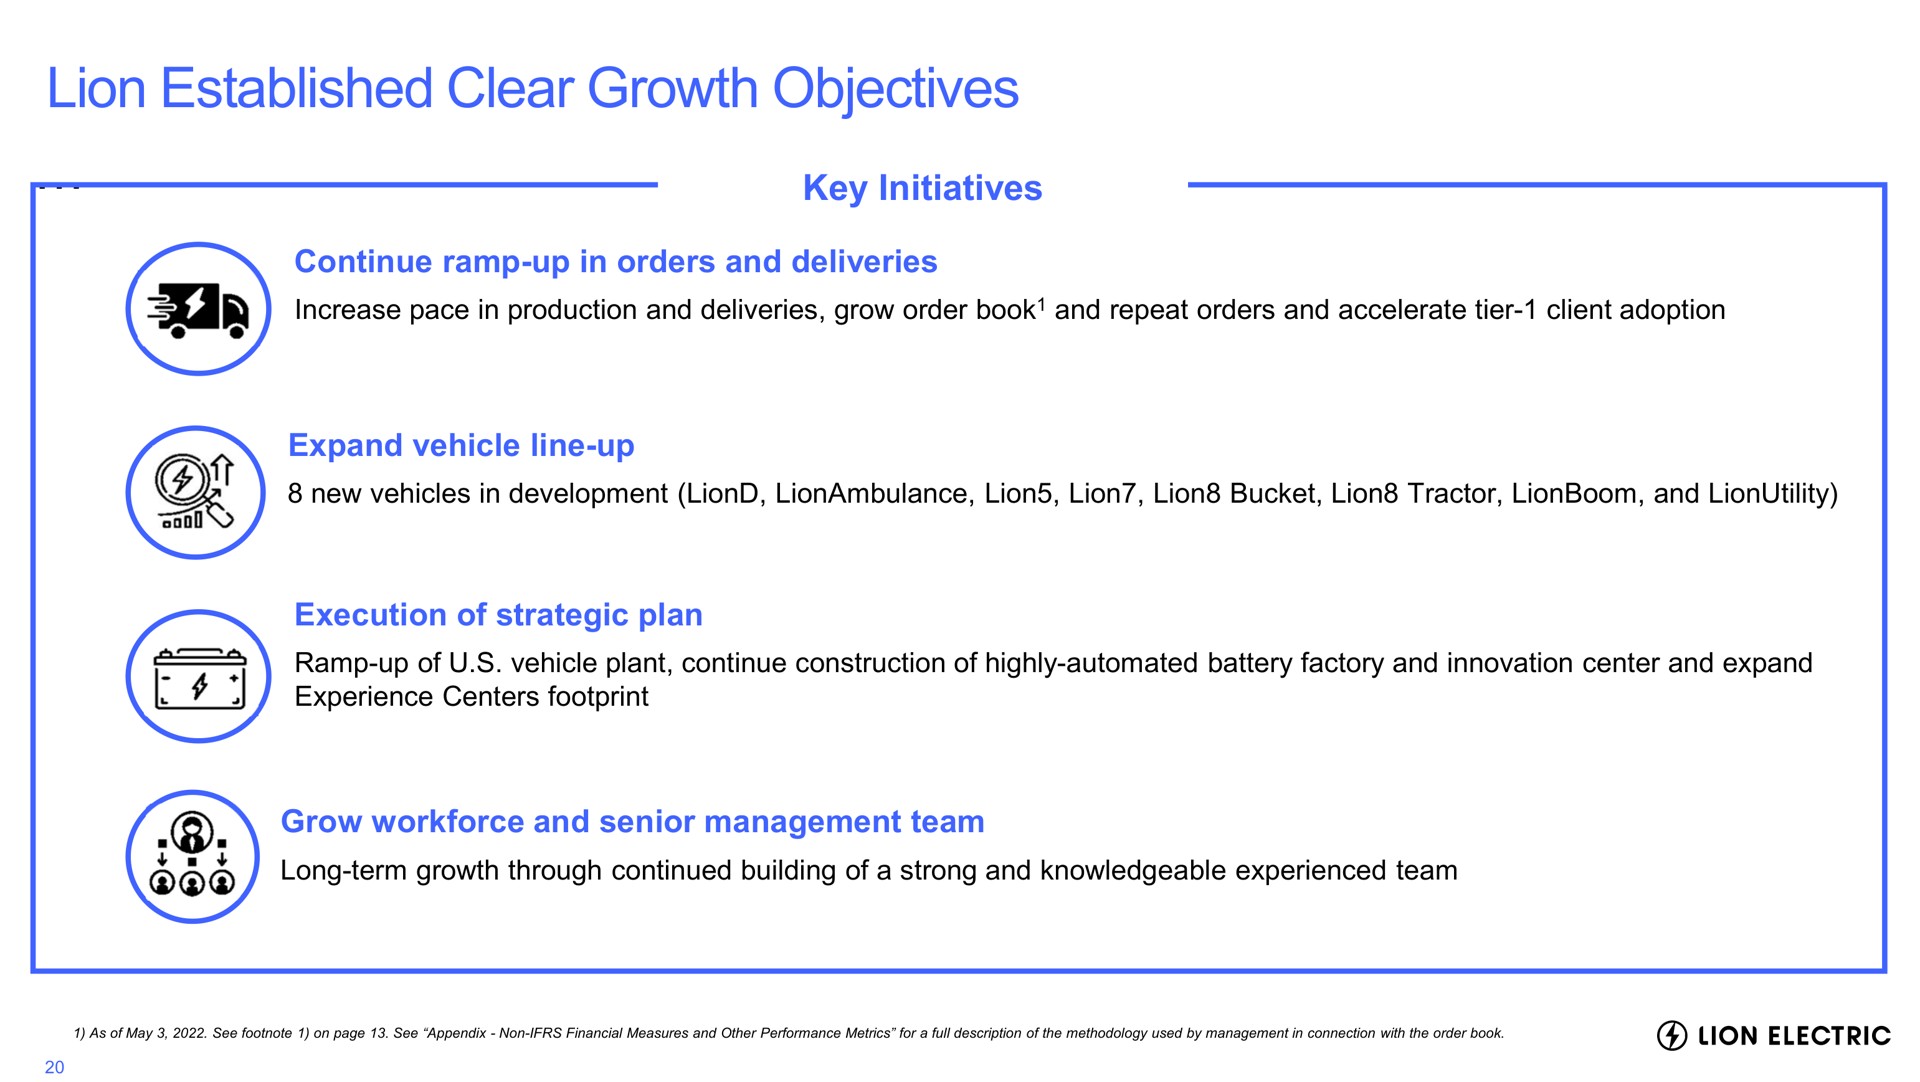 lion established clear growth objectives key initiatives continue ramp up in orders and deliveries expand vehicle line up execution of strategic plan grow and senior management team long term through continued building a strong knowledgeable experienced | Lion Electric